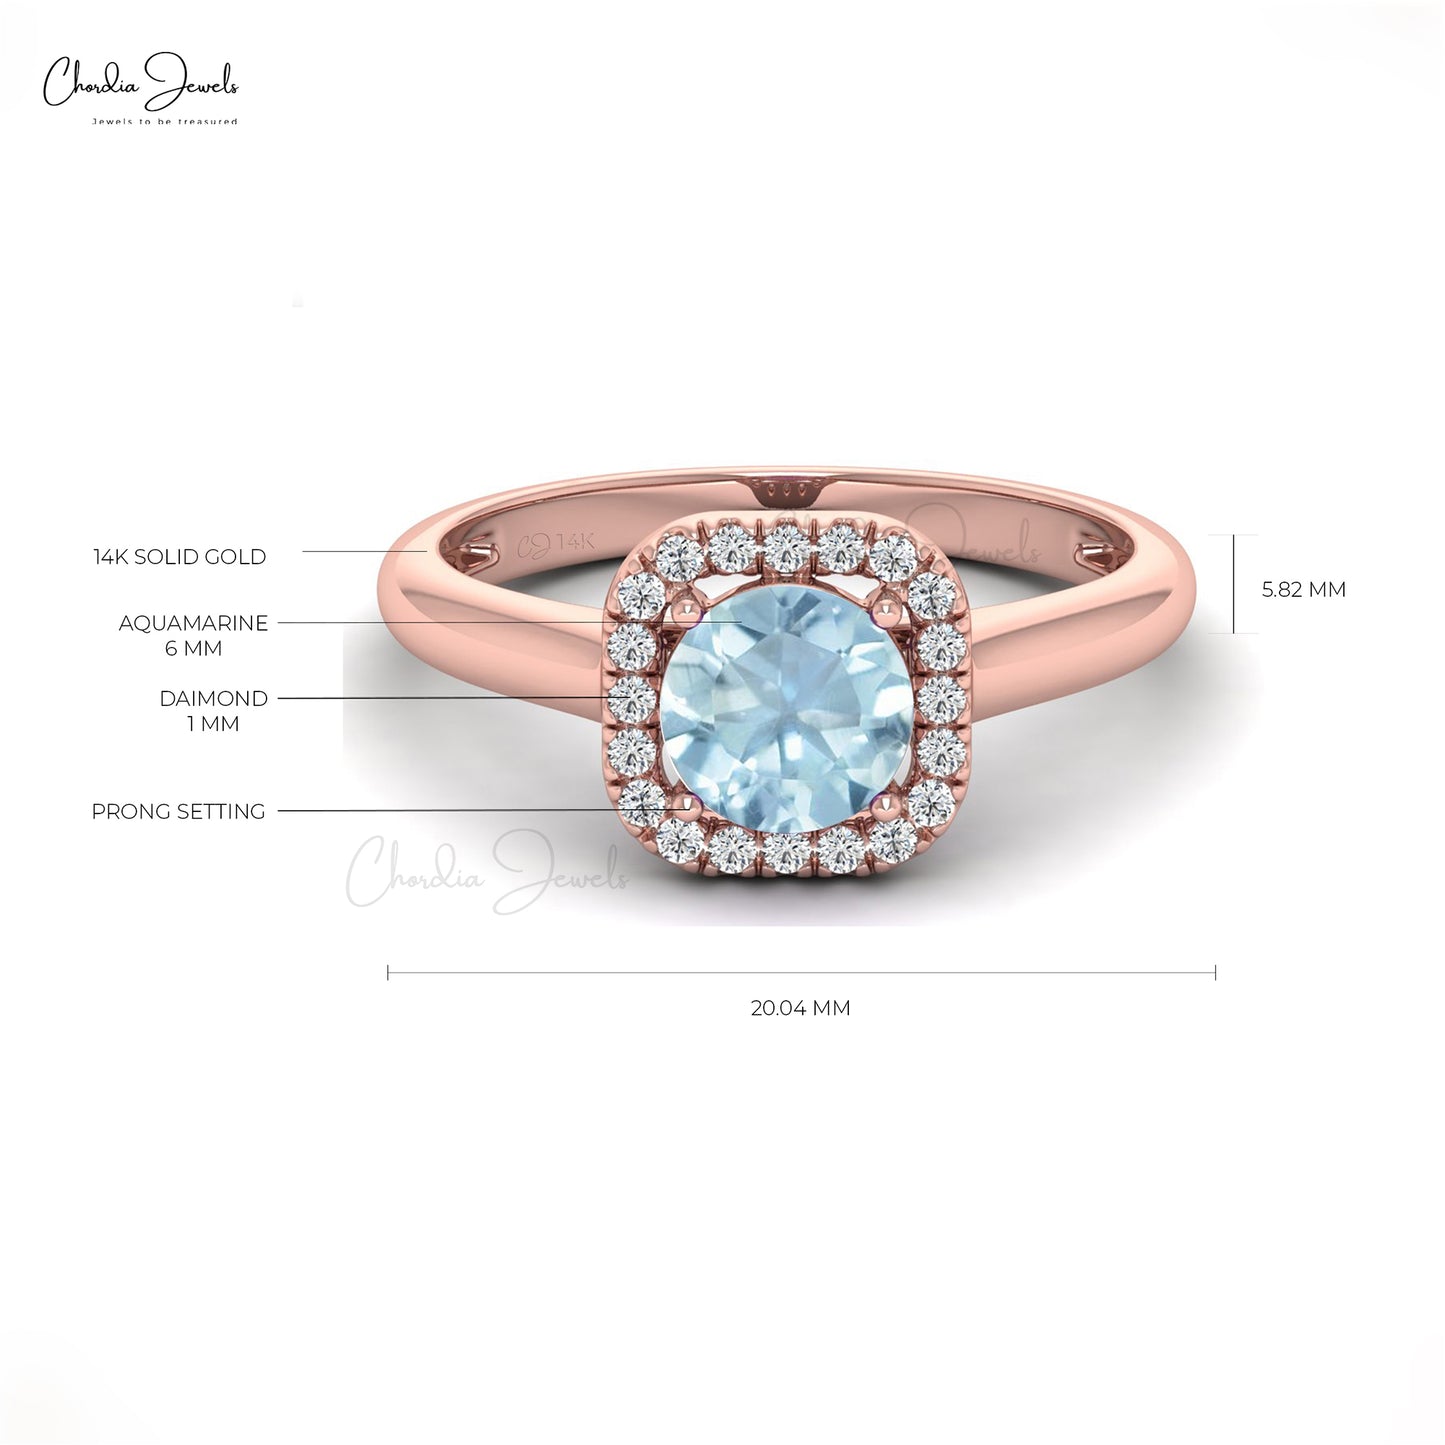 Natural Aquamarine and Diamond Halo Ring in 14k Solid Gold